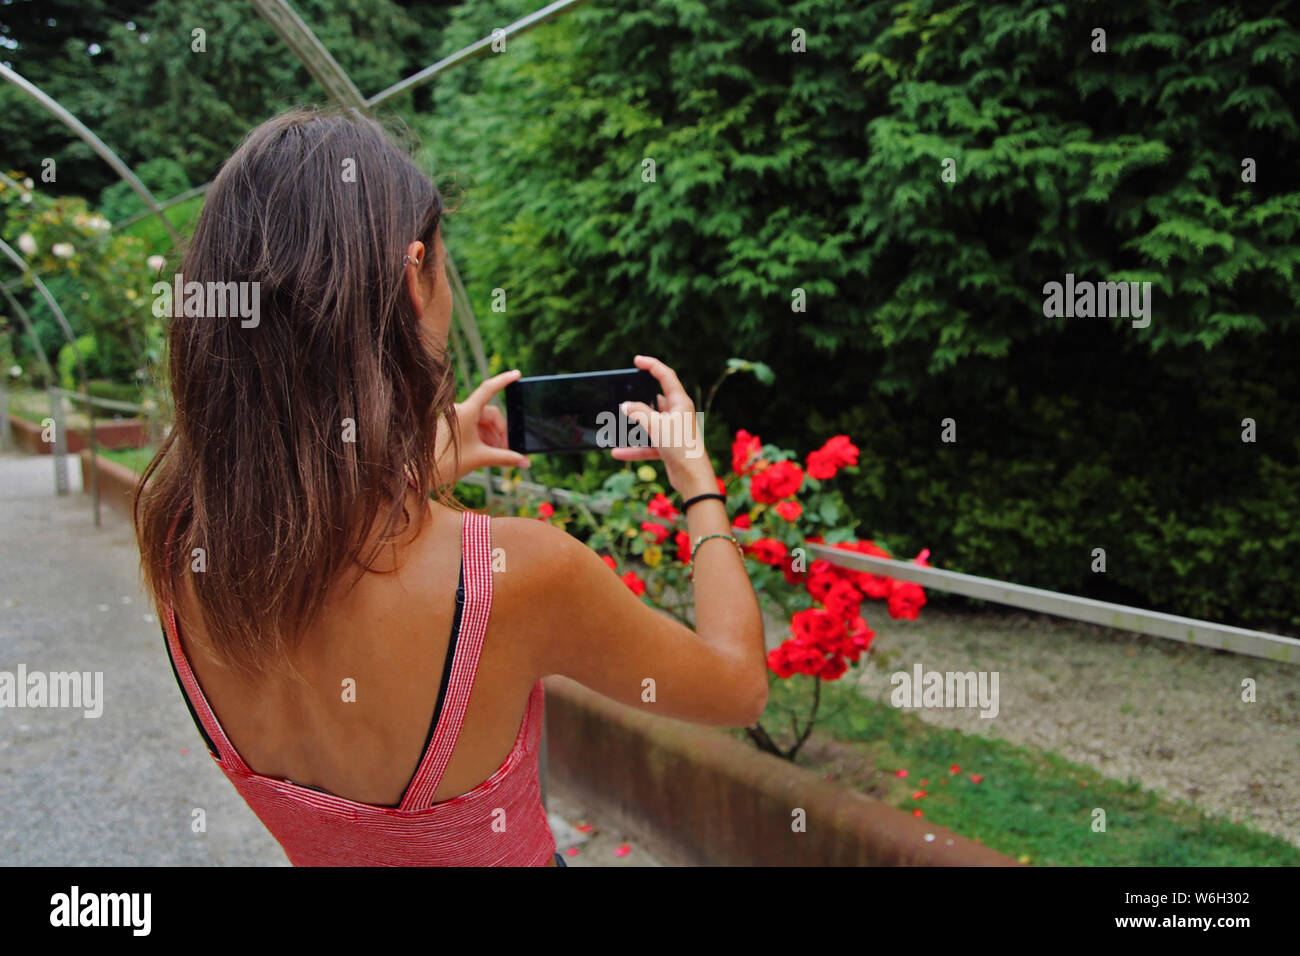 Young girl taking some pictures with her cell phone. Stock Photo